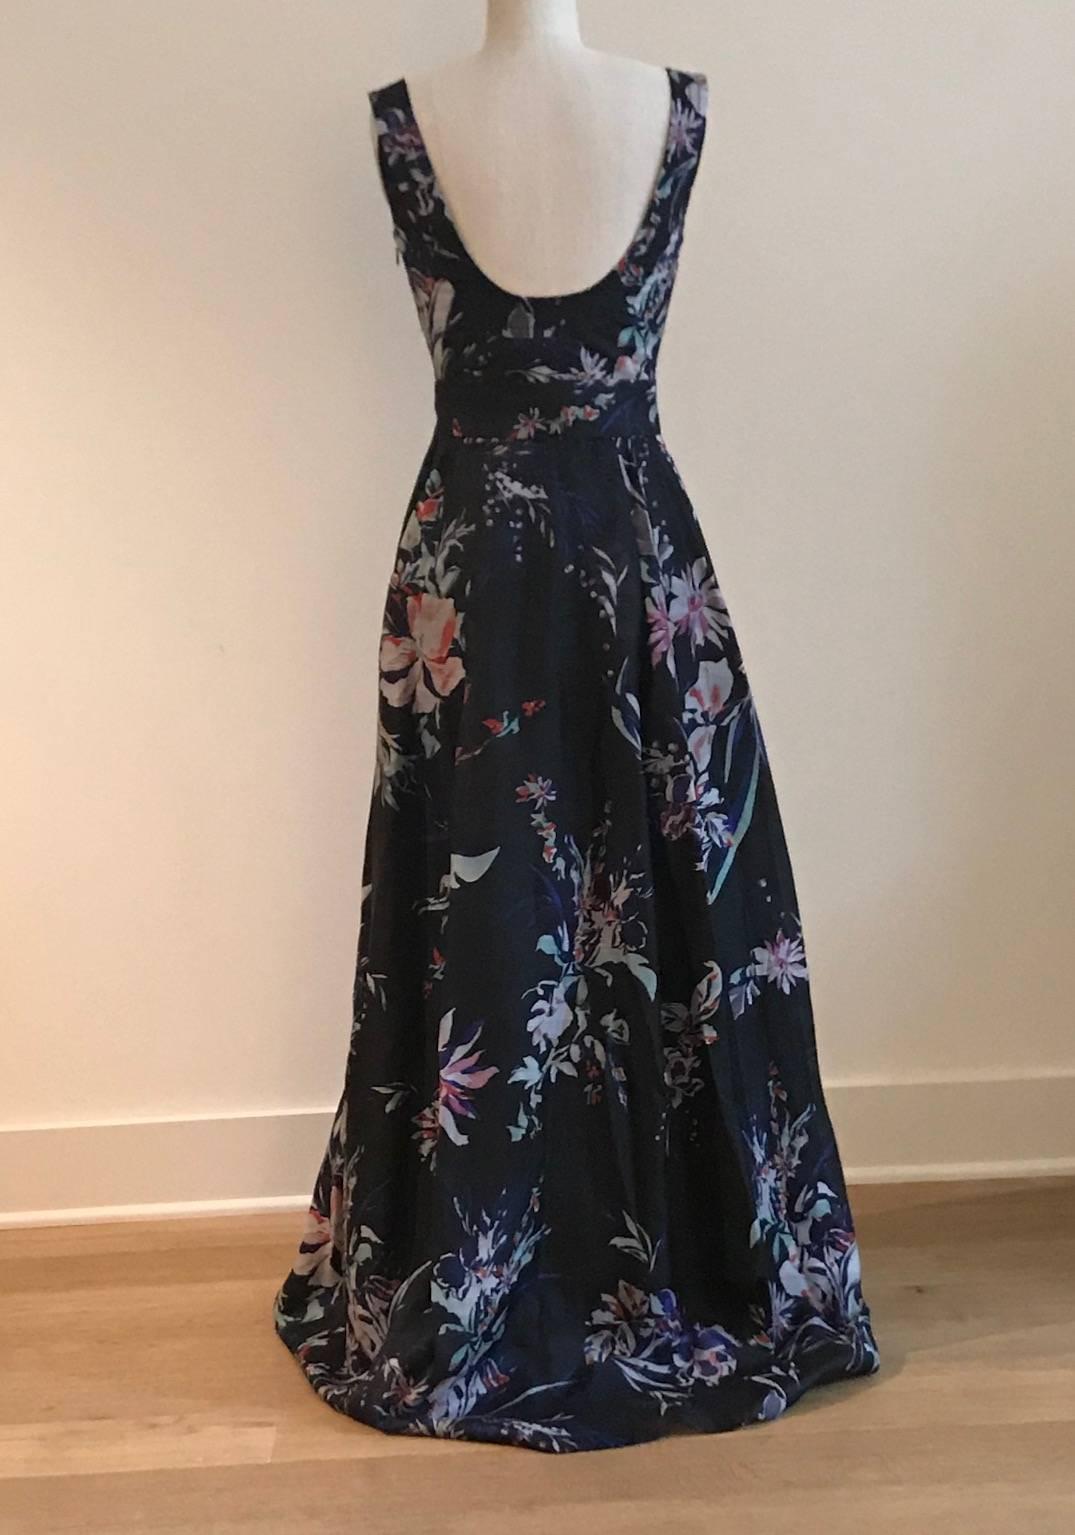 Christian Lacroix black full length dress with seamed trim detail at bust and straps and scoop back. Ivory, fuchsia, and blue and violet floral print throughout. Slit pockets at front side. Tie belt is fastened at back waist. Side zip and hook and